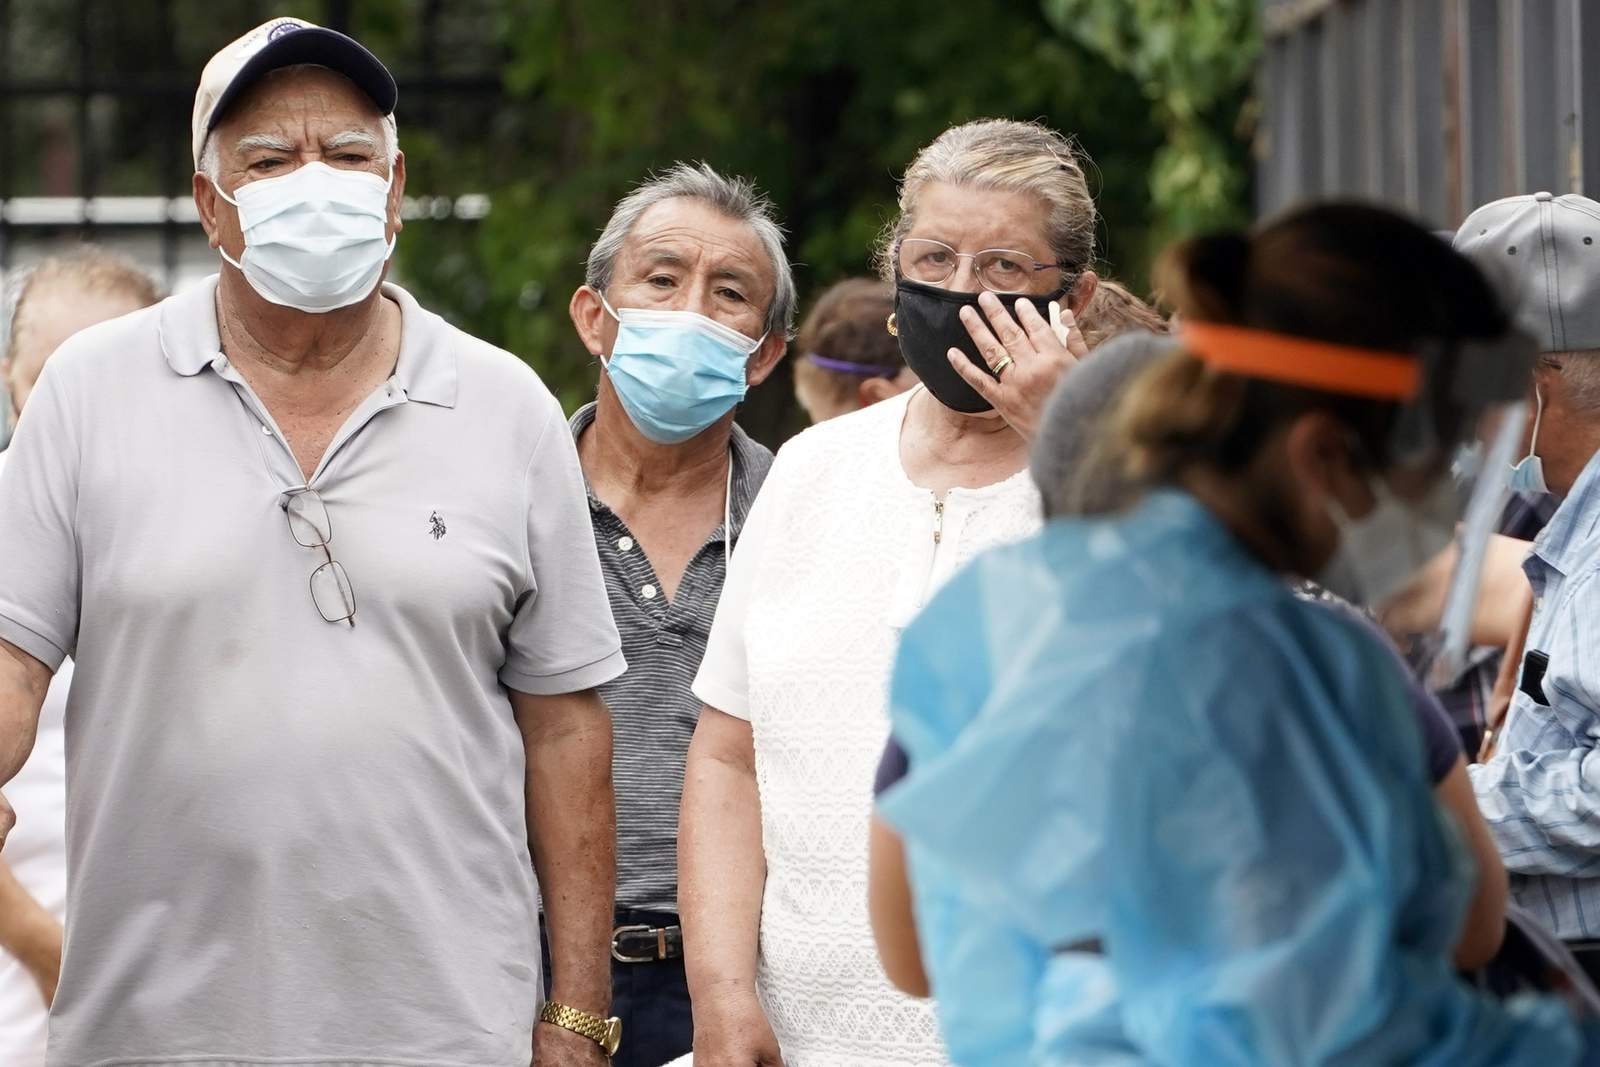 Masks now required in Texas but not Florida, where data shows COVID-19 numbers growing faster